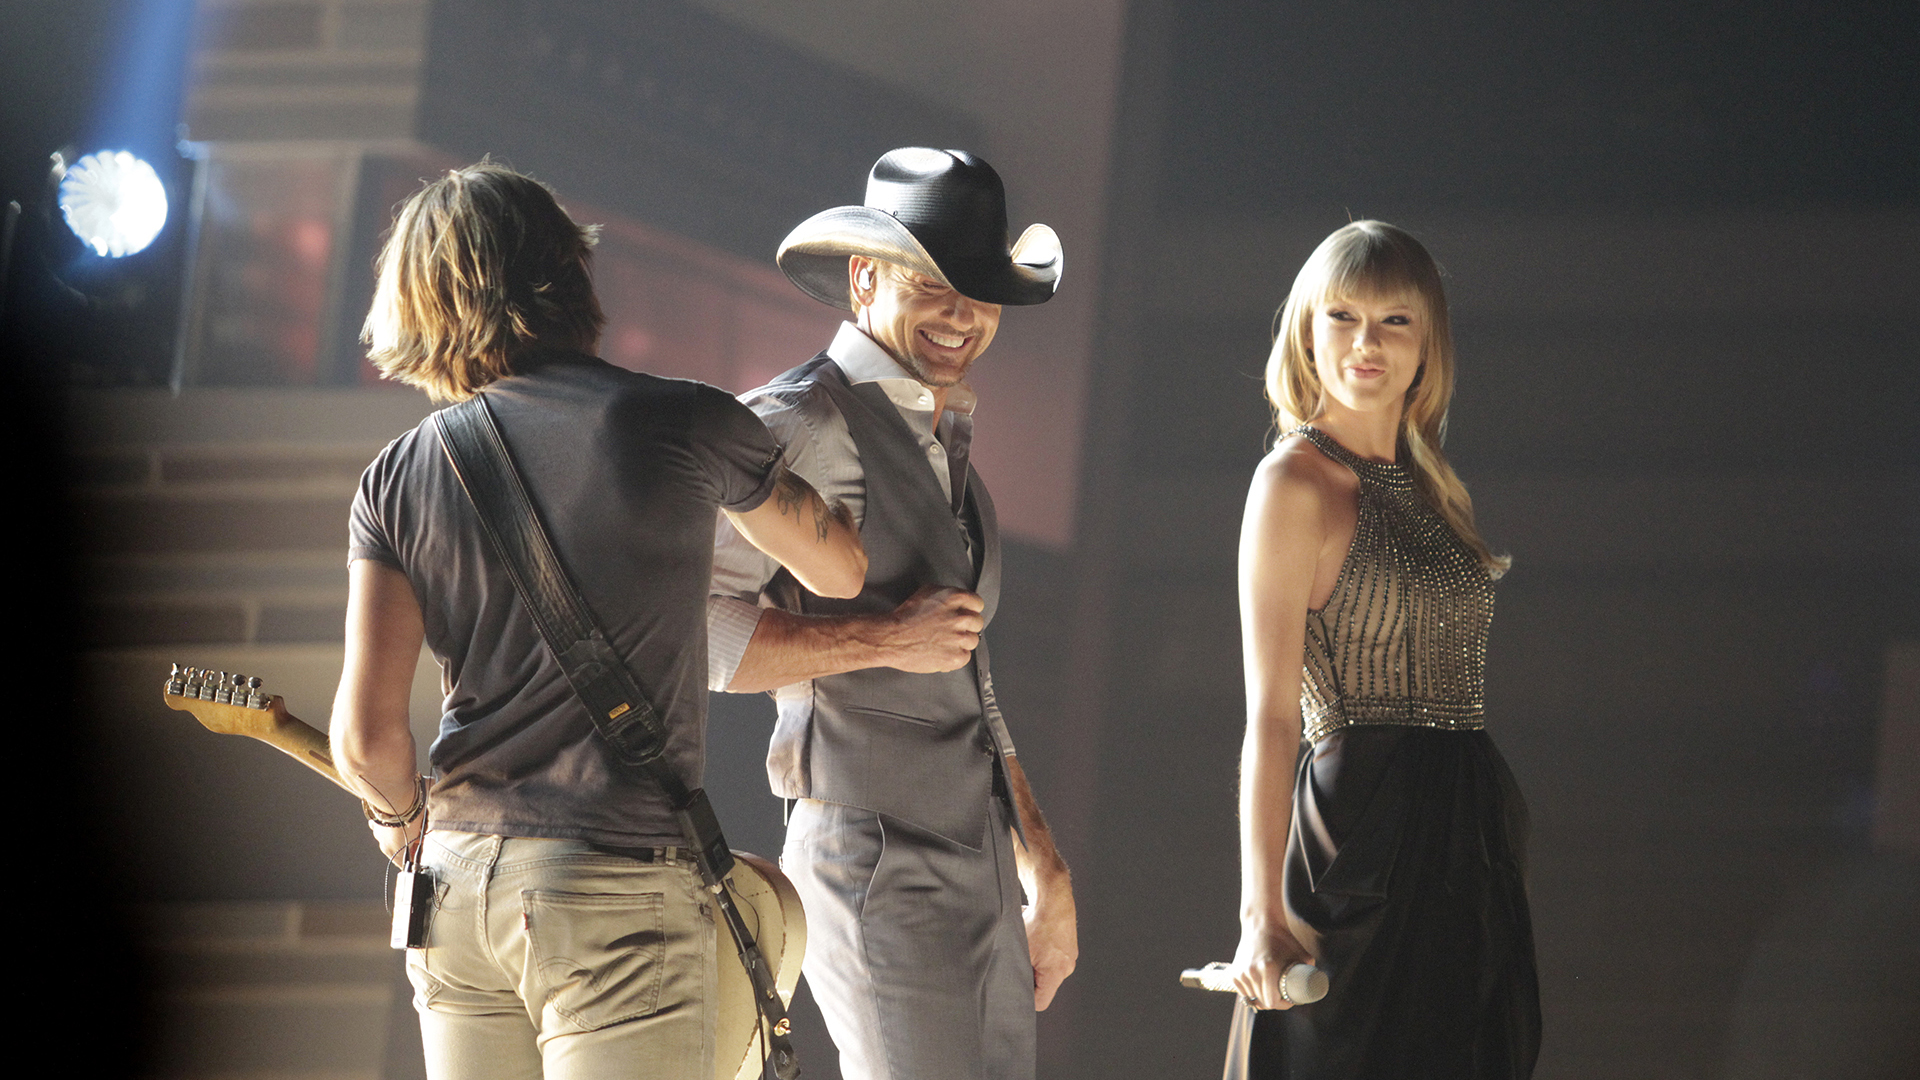 26. Tim McGraw, Taylor Swift, and Keith Urban perform 